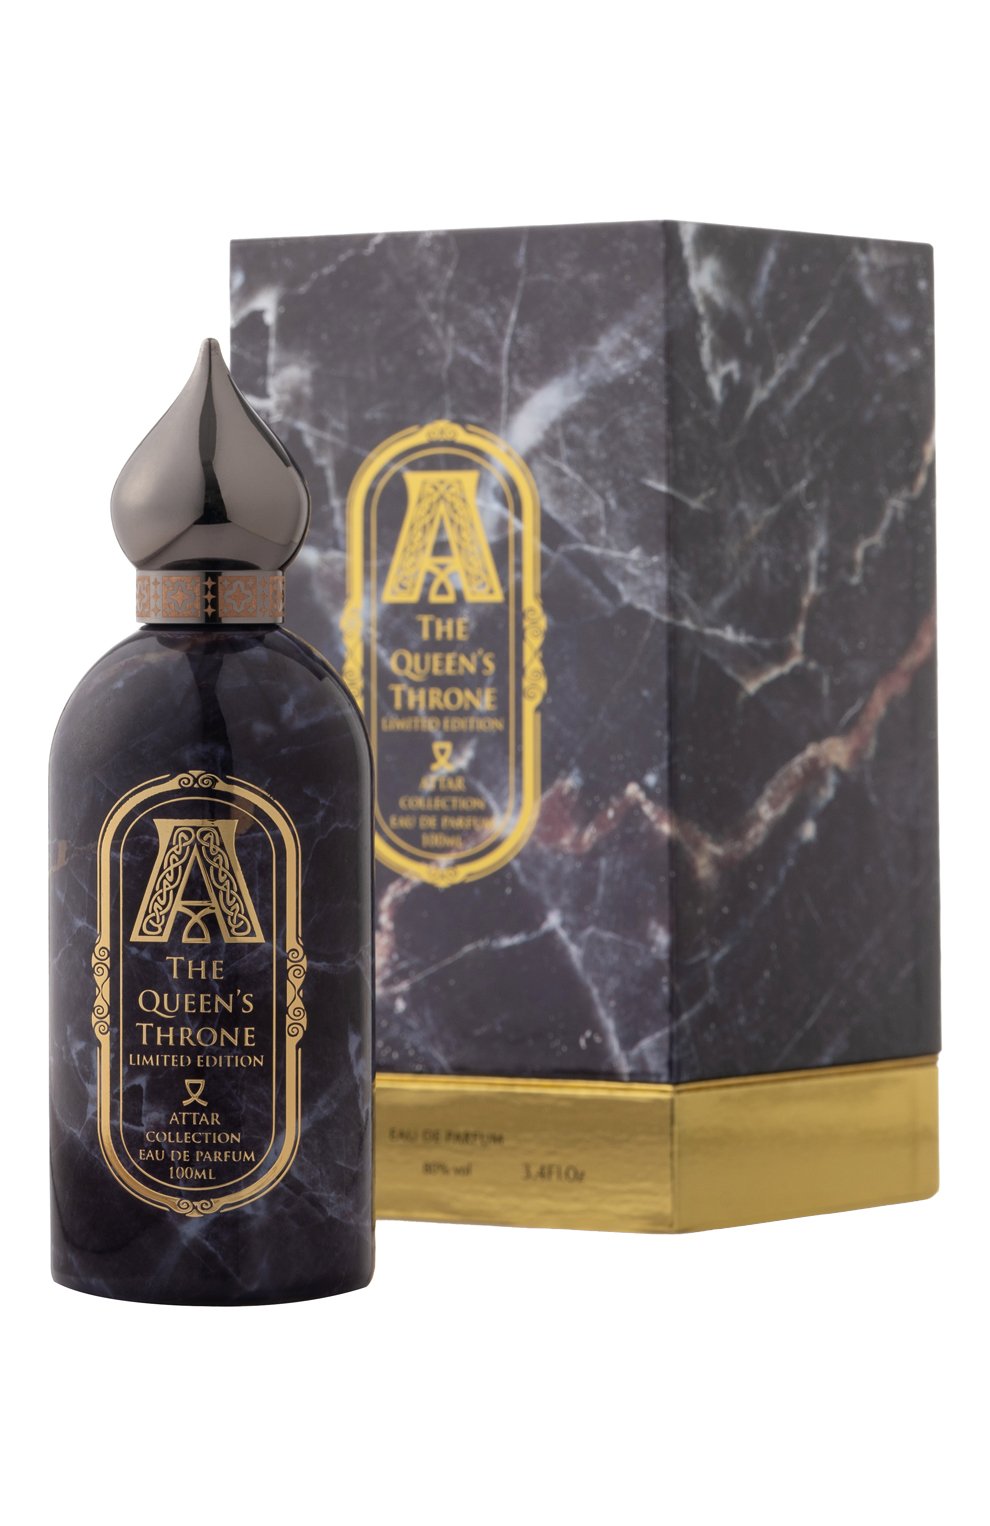 Attar collection the queens throne. Парфюм Attar collection the Queen's Throne. Attar collection the Queen’s Throne 100. Attar collection the Queen's Throne EDP, 100 ml (Luxe премиум). Attar collection the Queen of Sheba, EDP., 65 ml тестер.